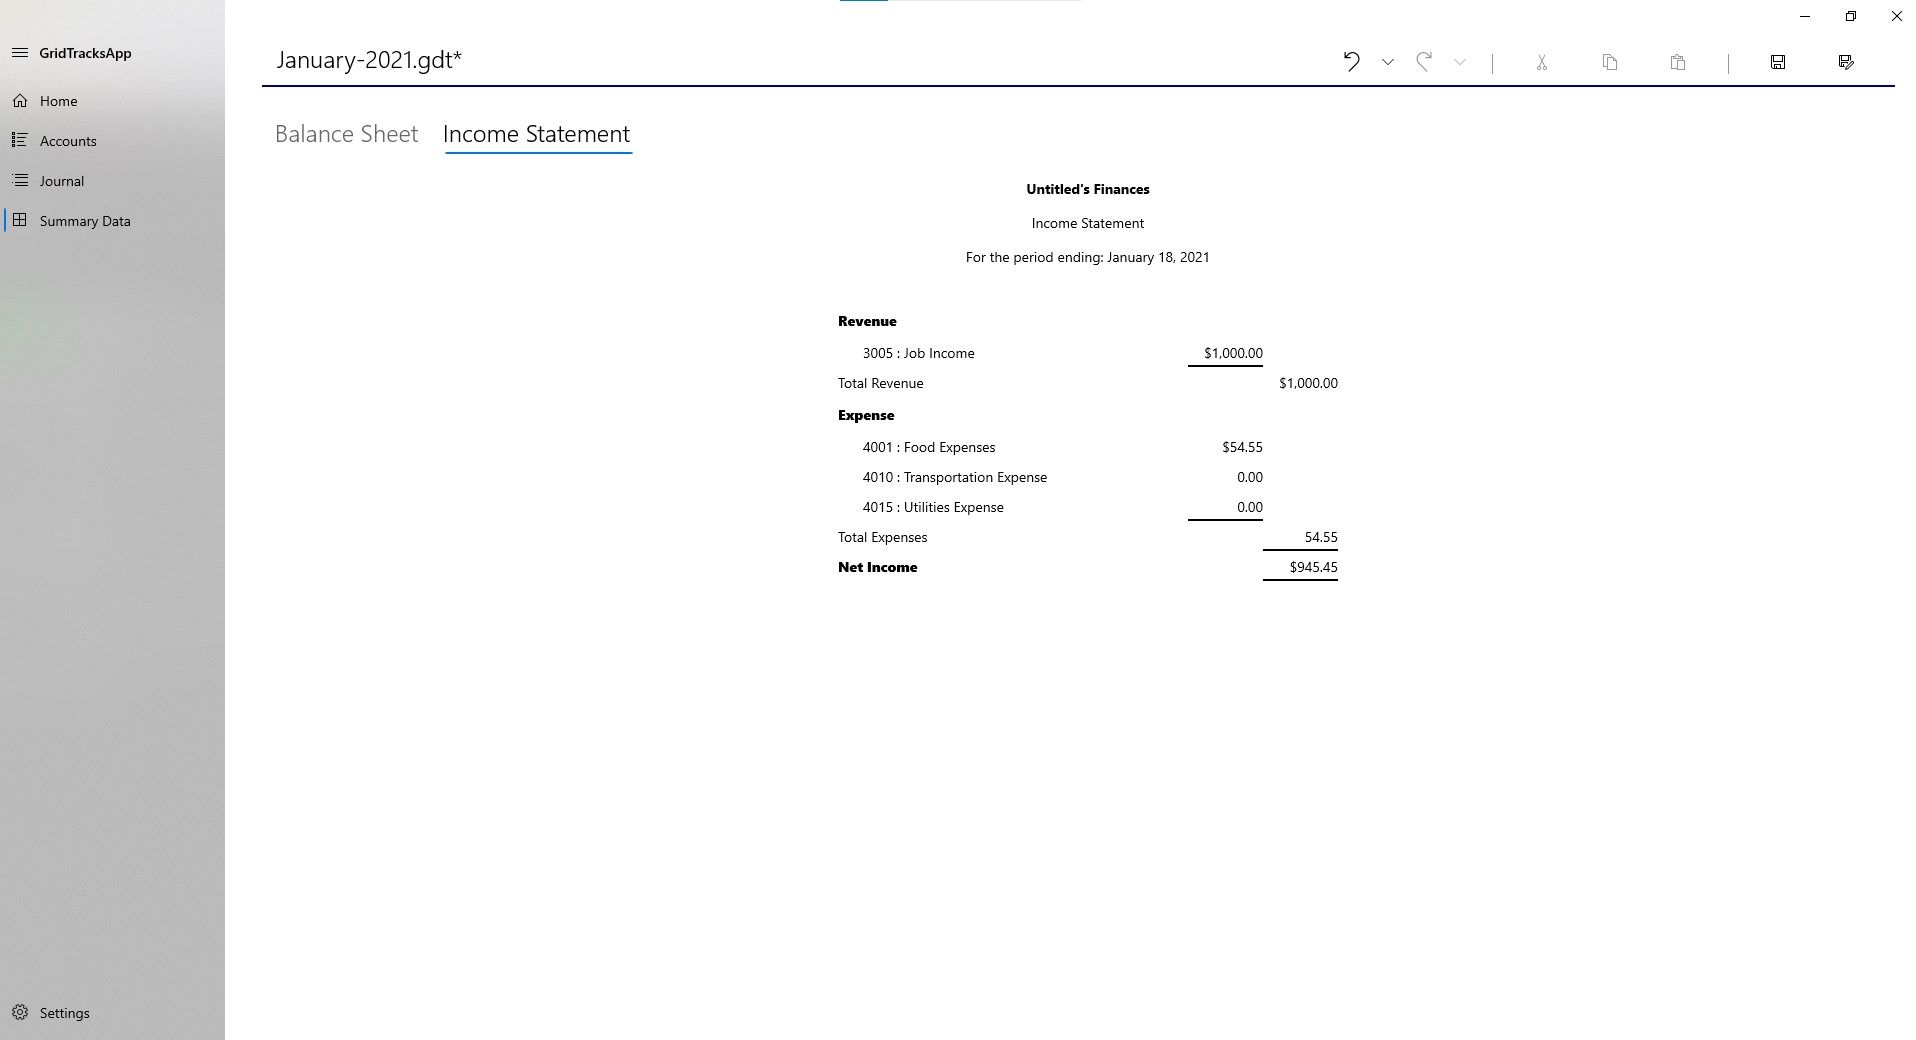 Automatically generated Income Statement